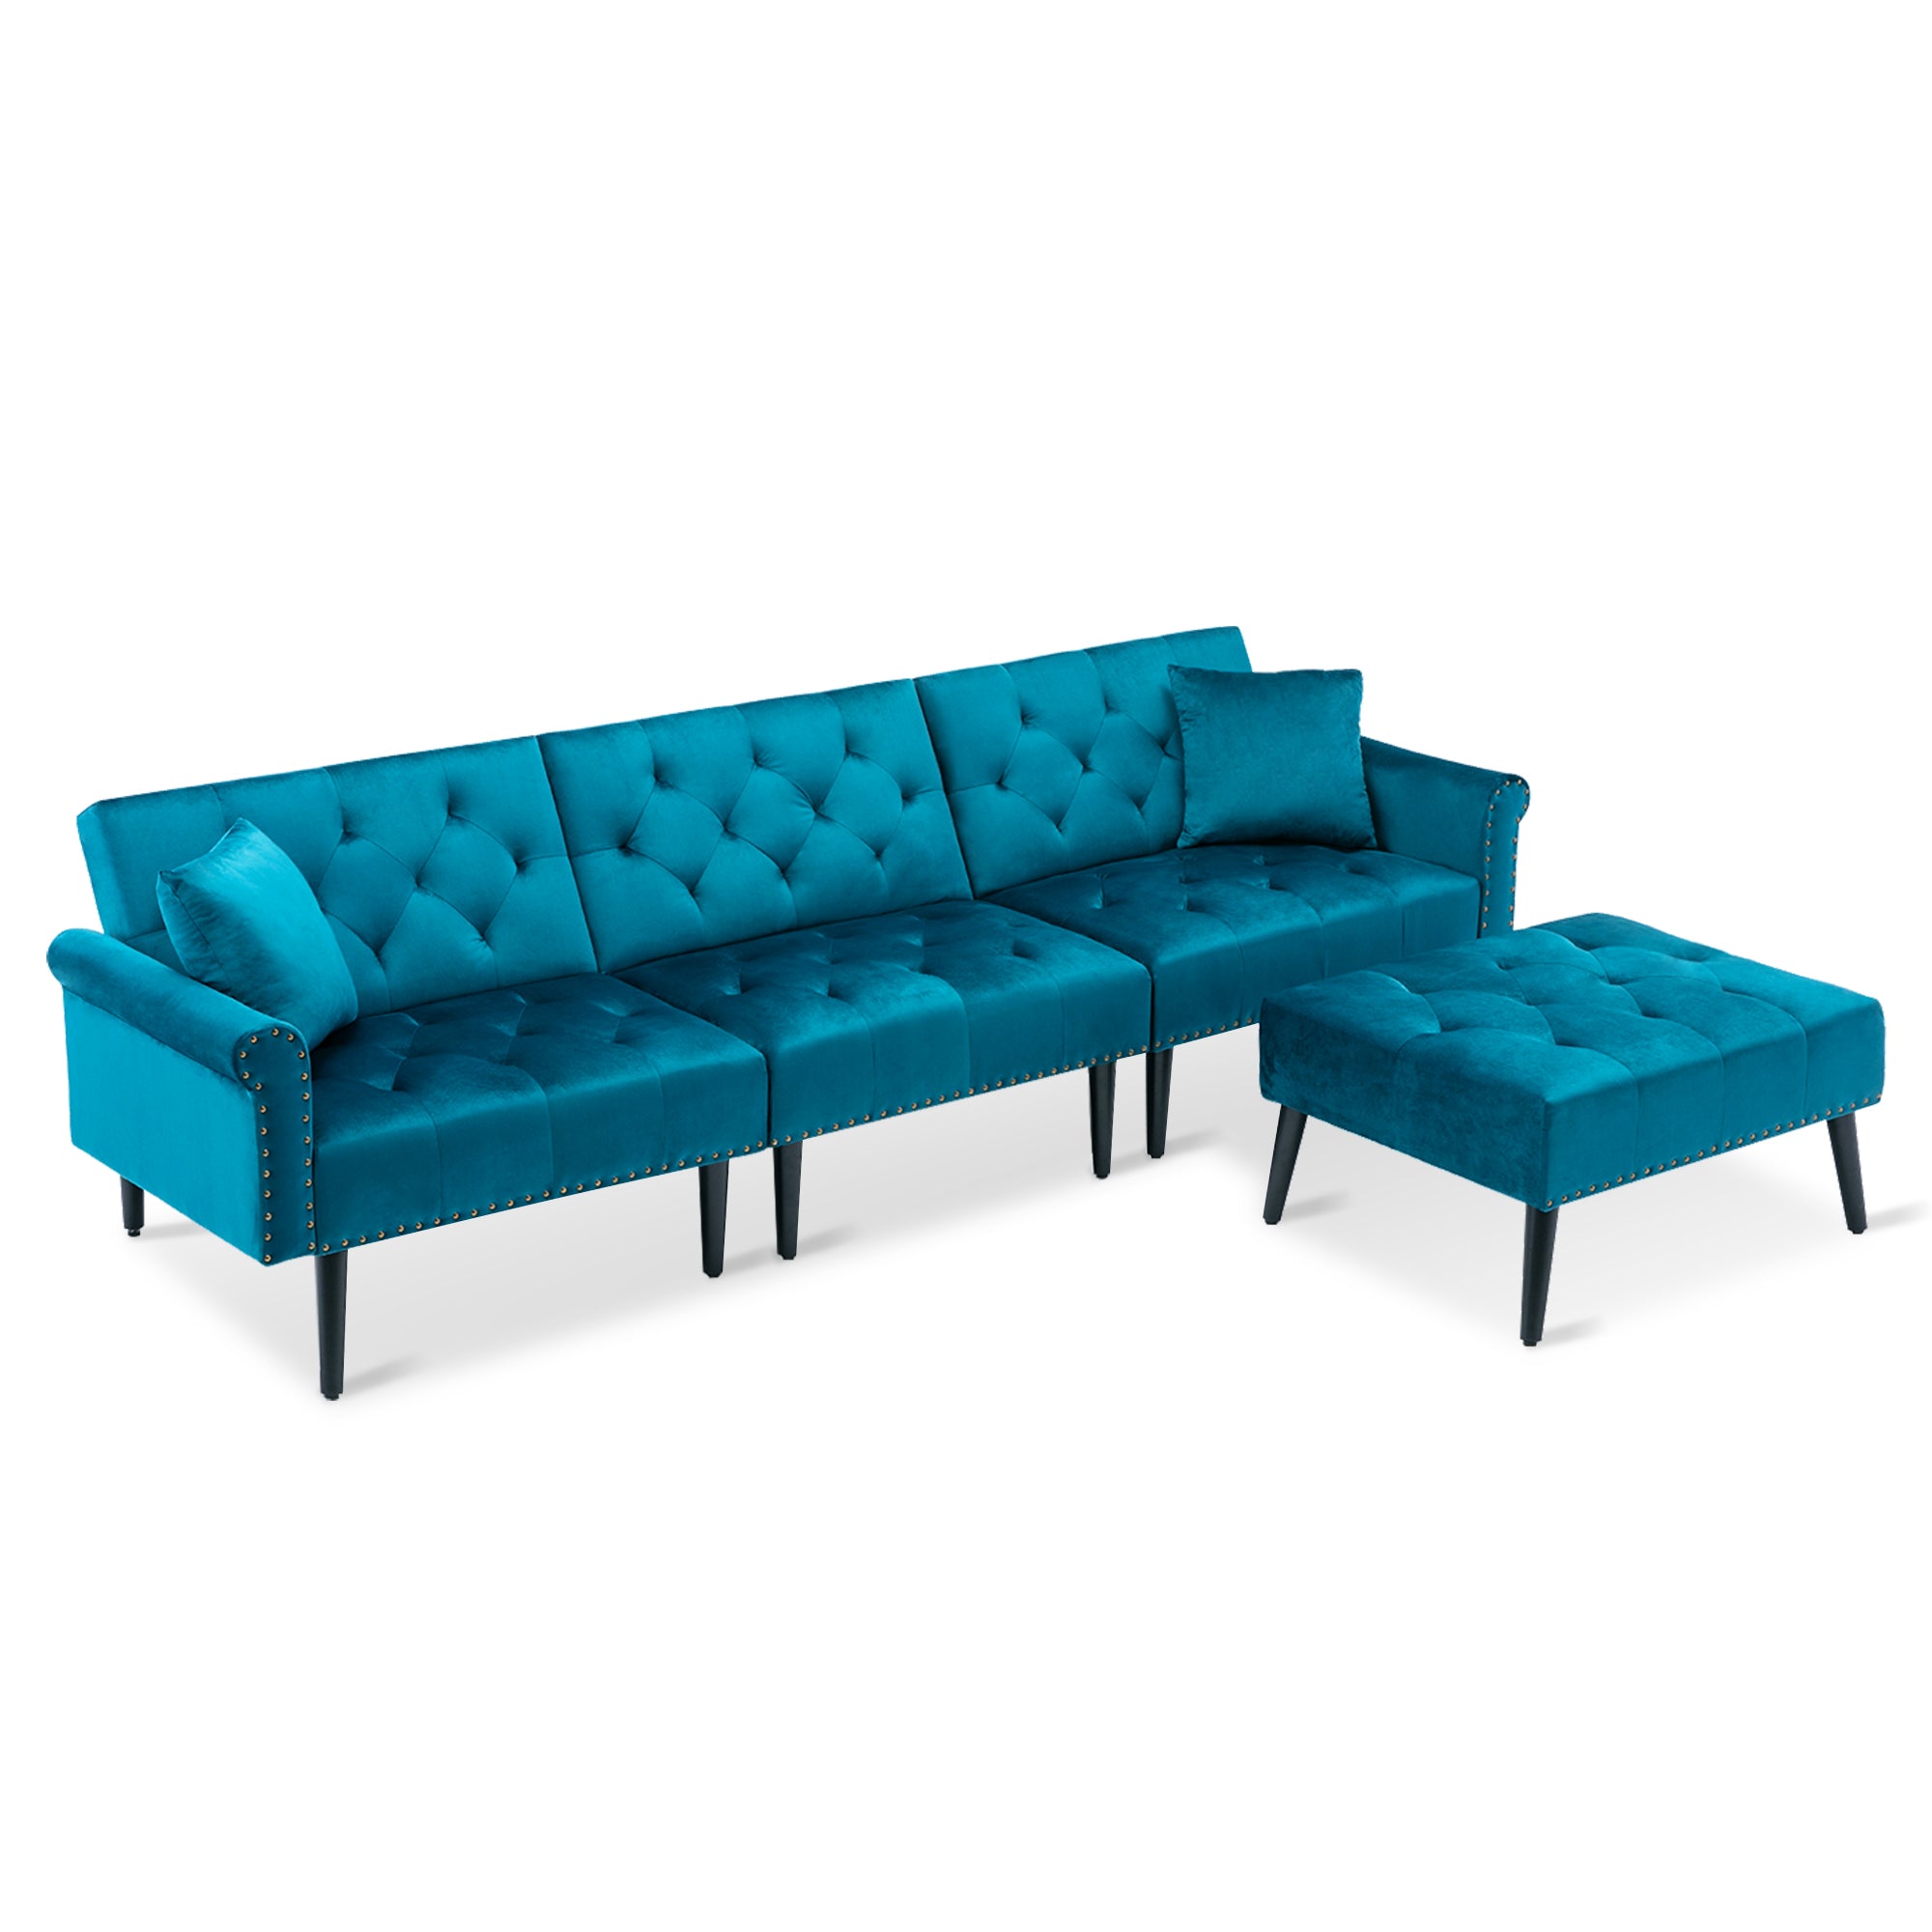 Ivinta Convertible Velvet Sofa Couch, Sectional Sofa with Ottoman, Mid-Century Upholstered Comfy Futon Sofa Bed